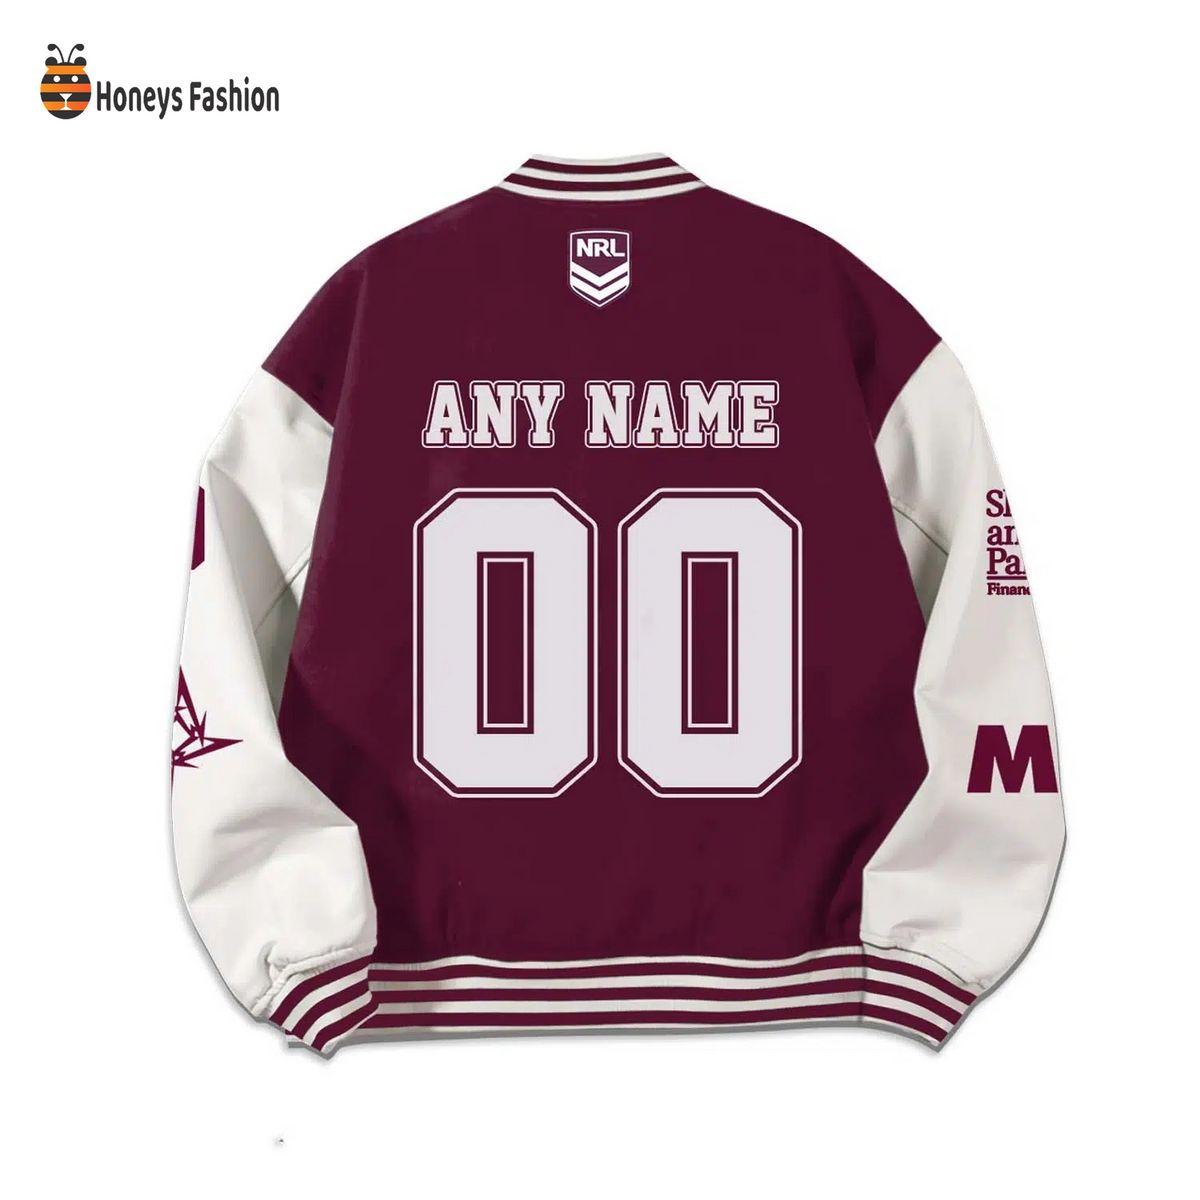 Manly Sea Eagles Rugby Personalized Jacket